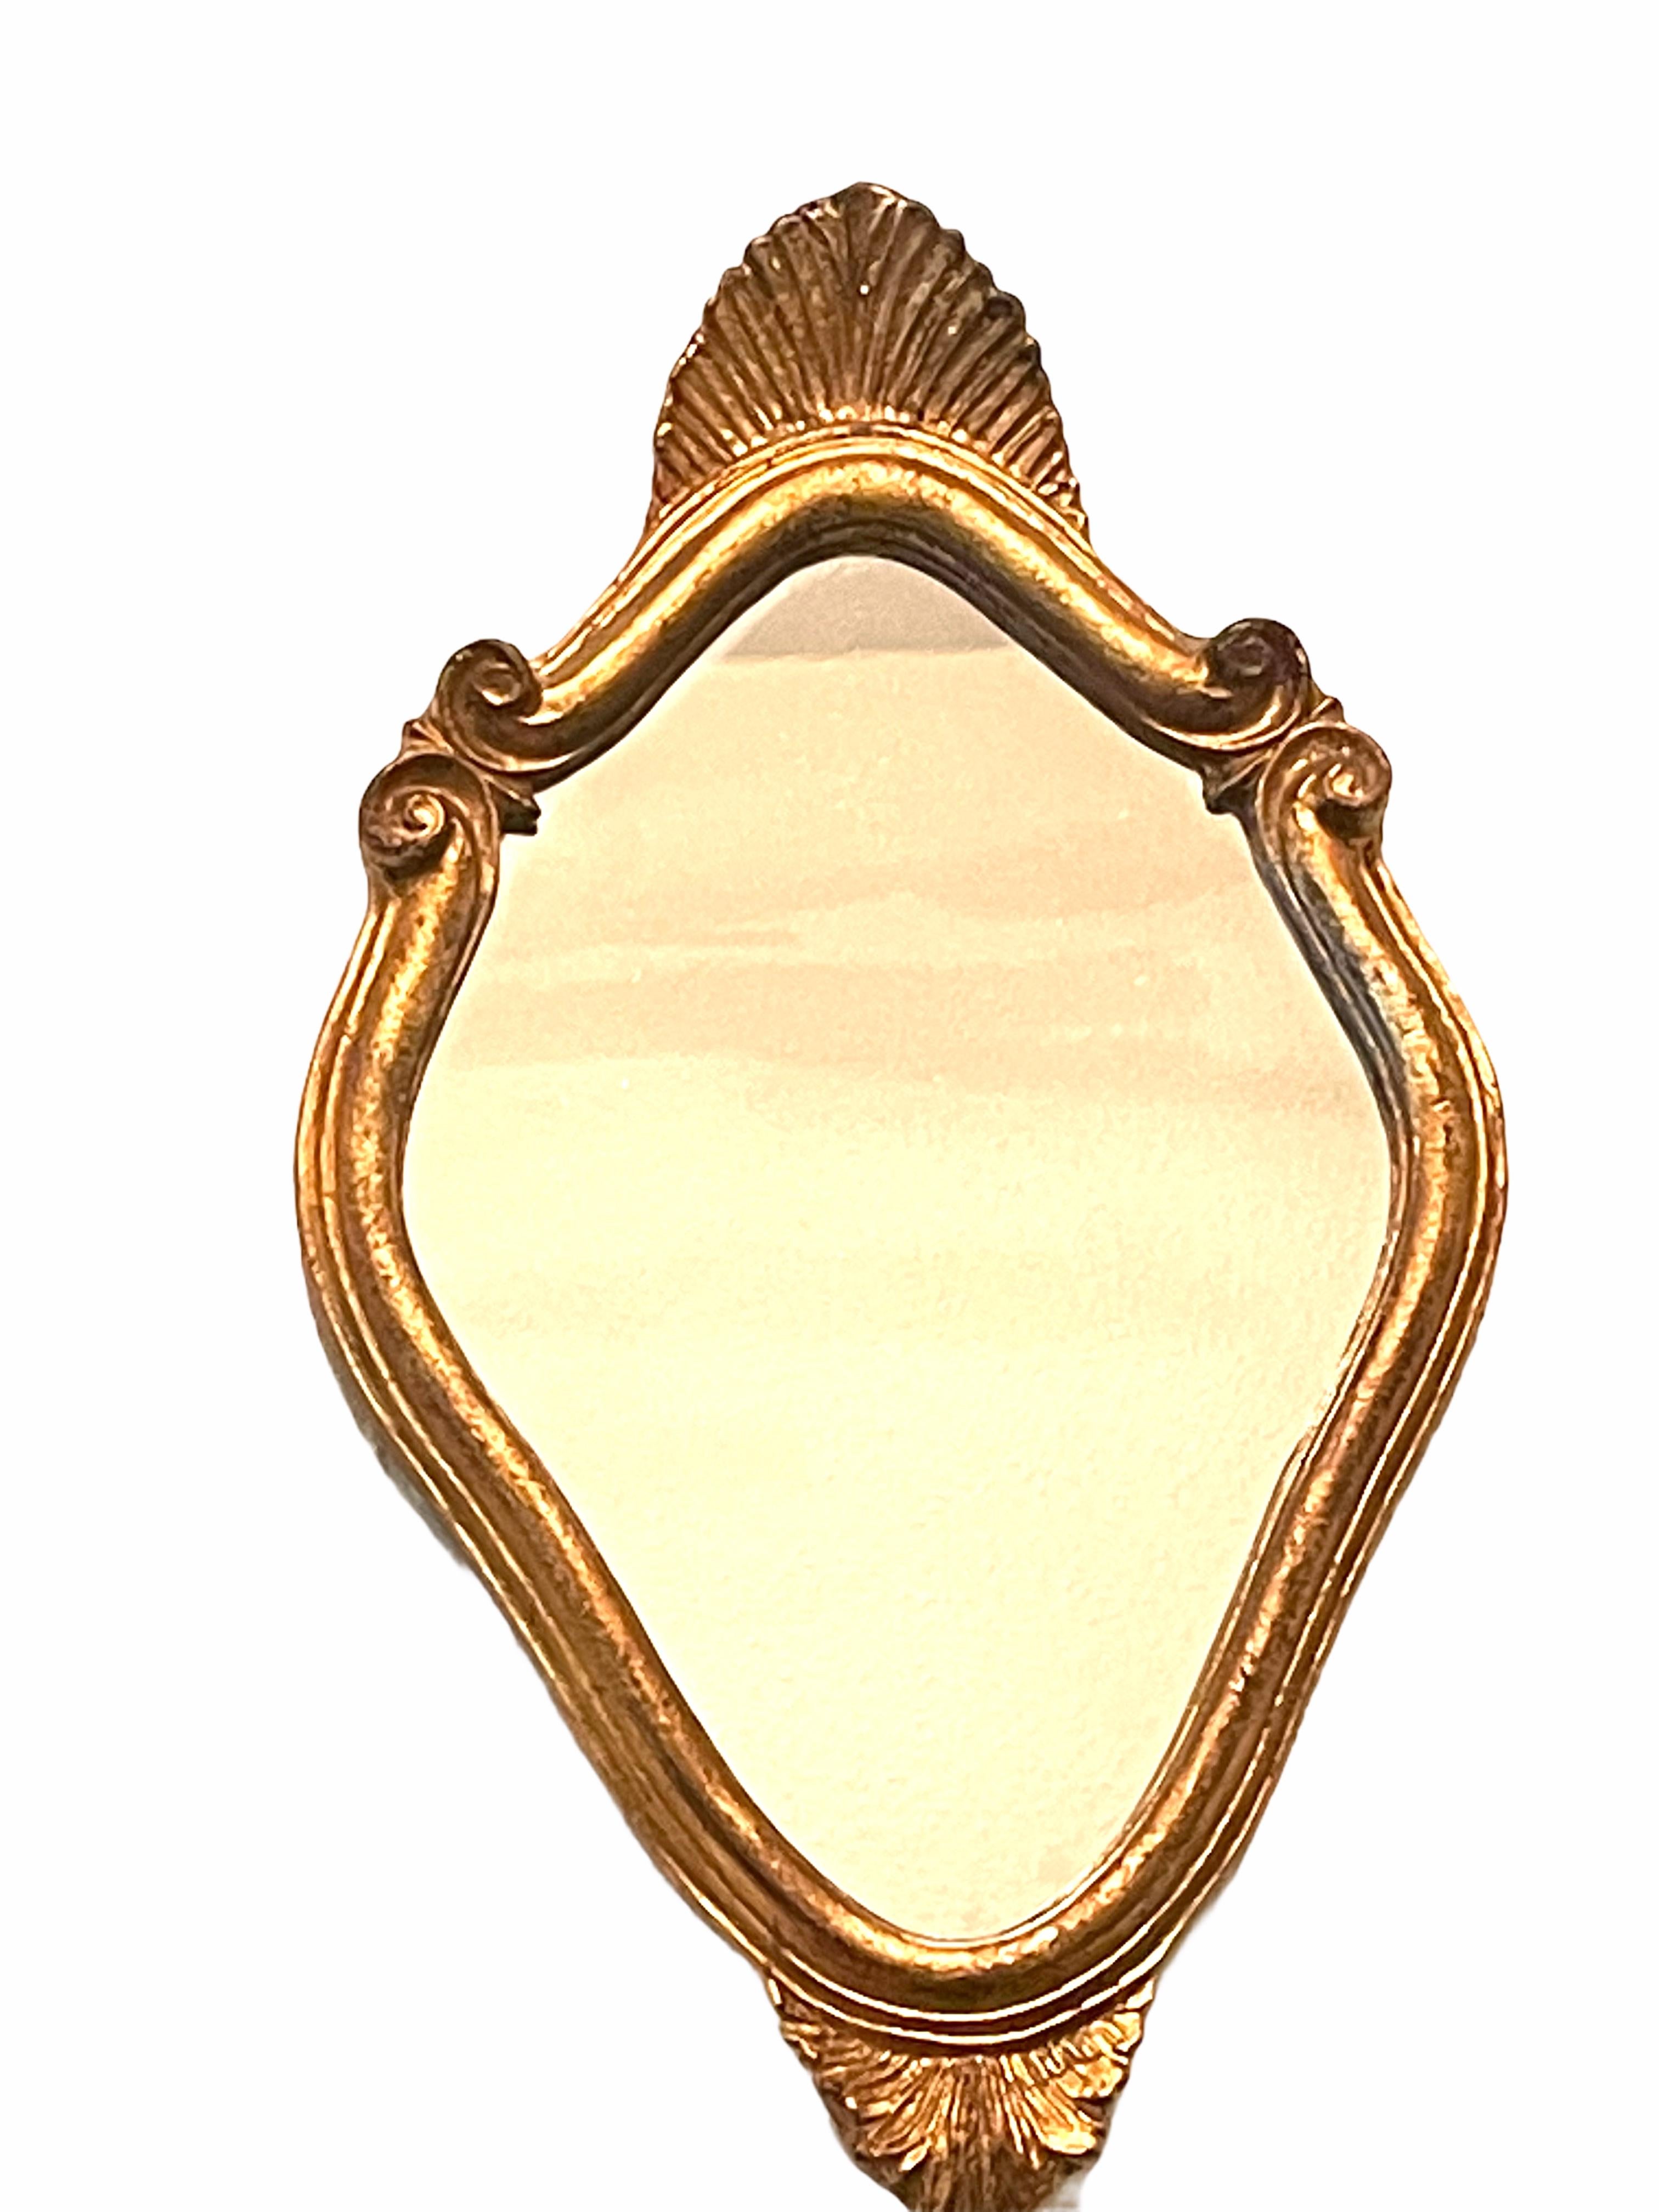 Beautiful Hollywood Regency style toleware mirror. The gilt frame surrounds a glass mirror. Made in Italy, circa 1960s. Beautiful small mirror for any room. Nice addition to any room.